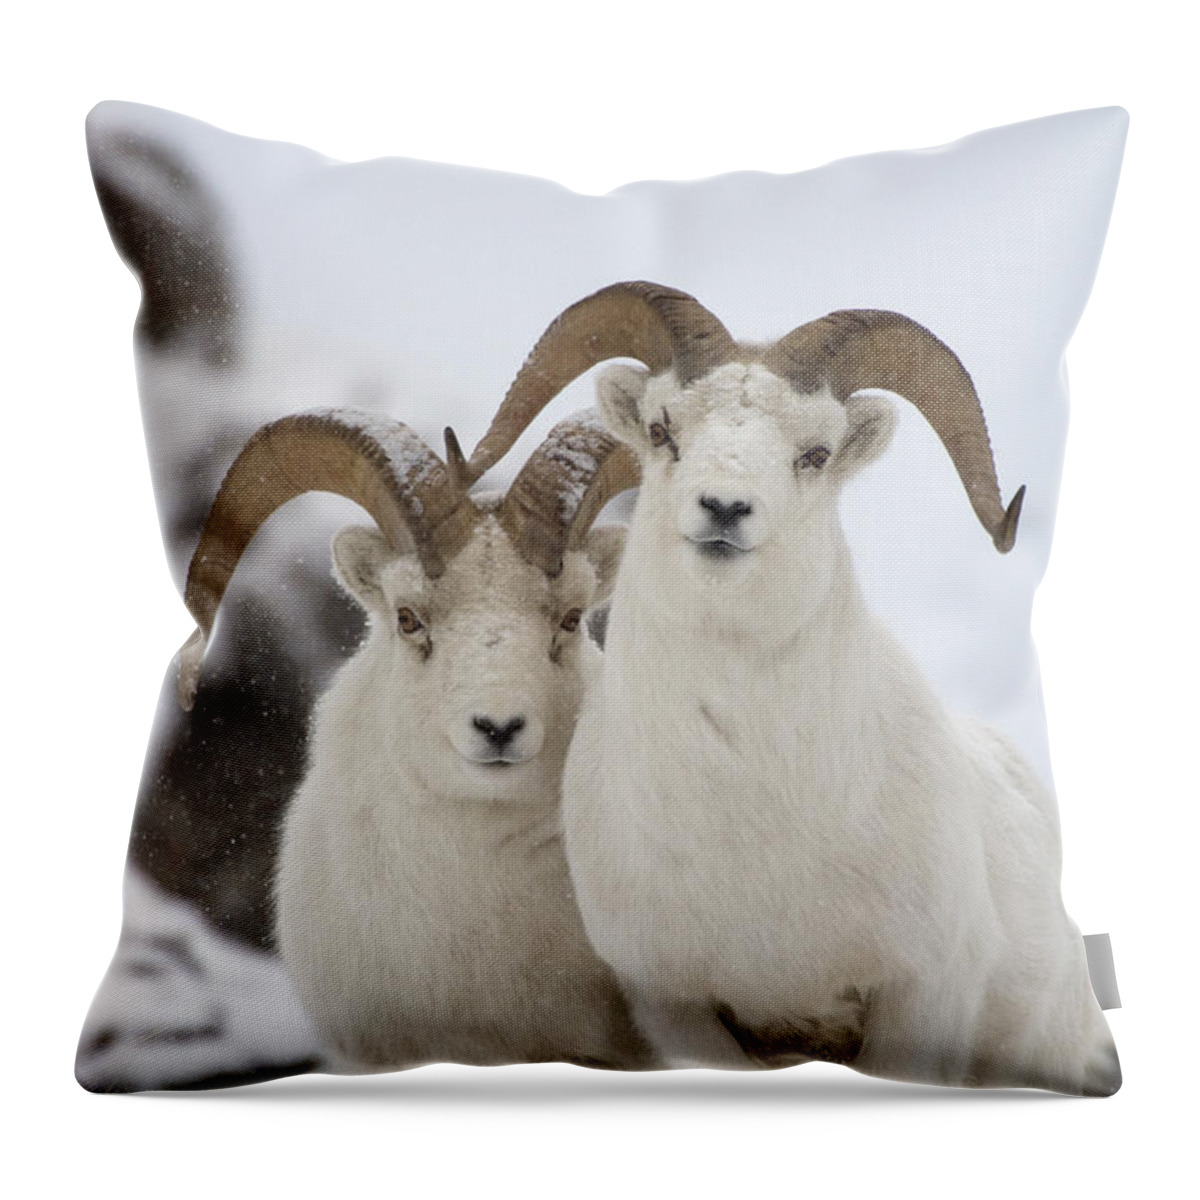 Mp Throw Pillow featuring the photograph Dall Sheep Ovis Dalli Rams, Yukon by Michael Quinton